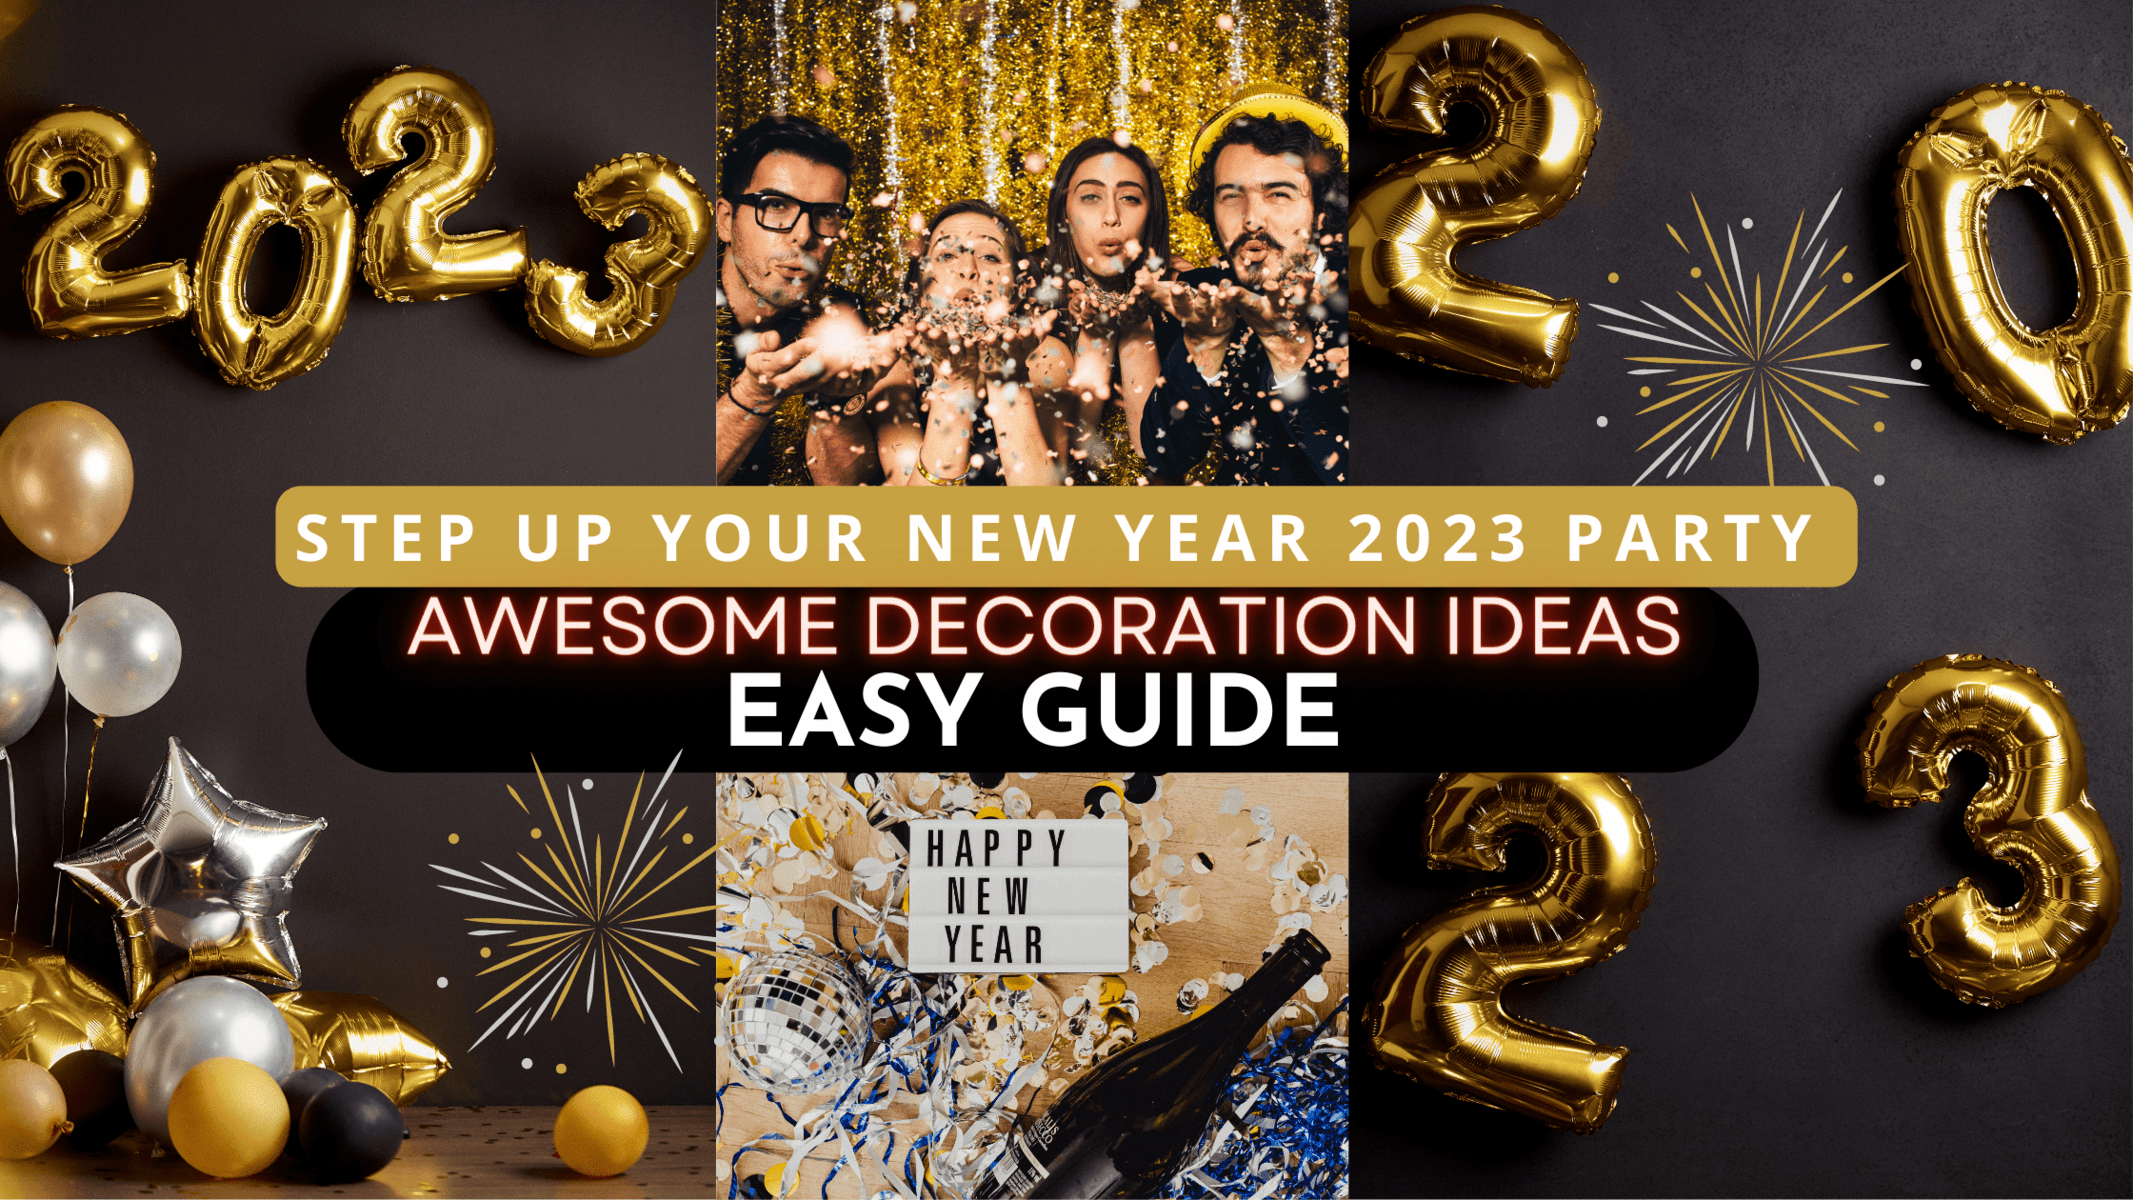 StepUp your New Year 2023 Party Decoration - Awesome Ideas for Home Makeover